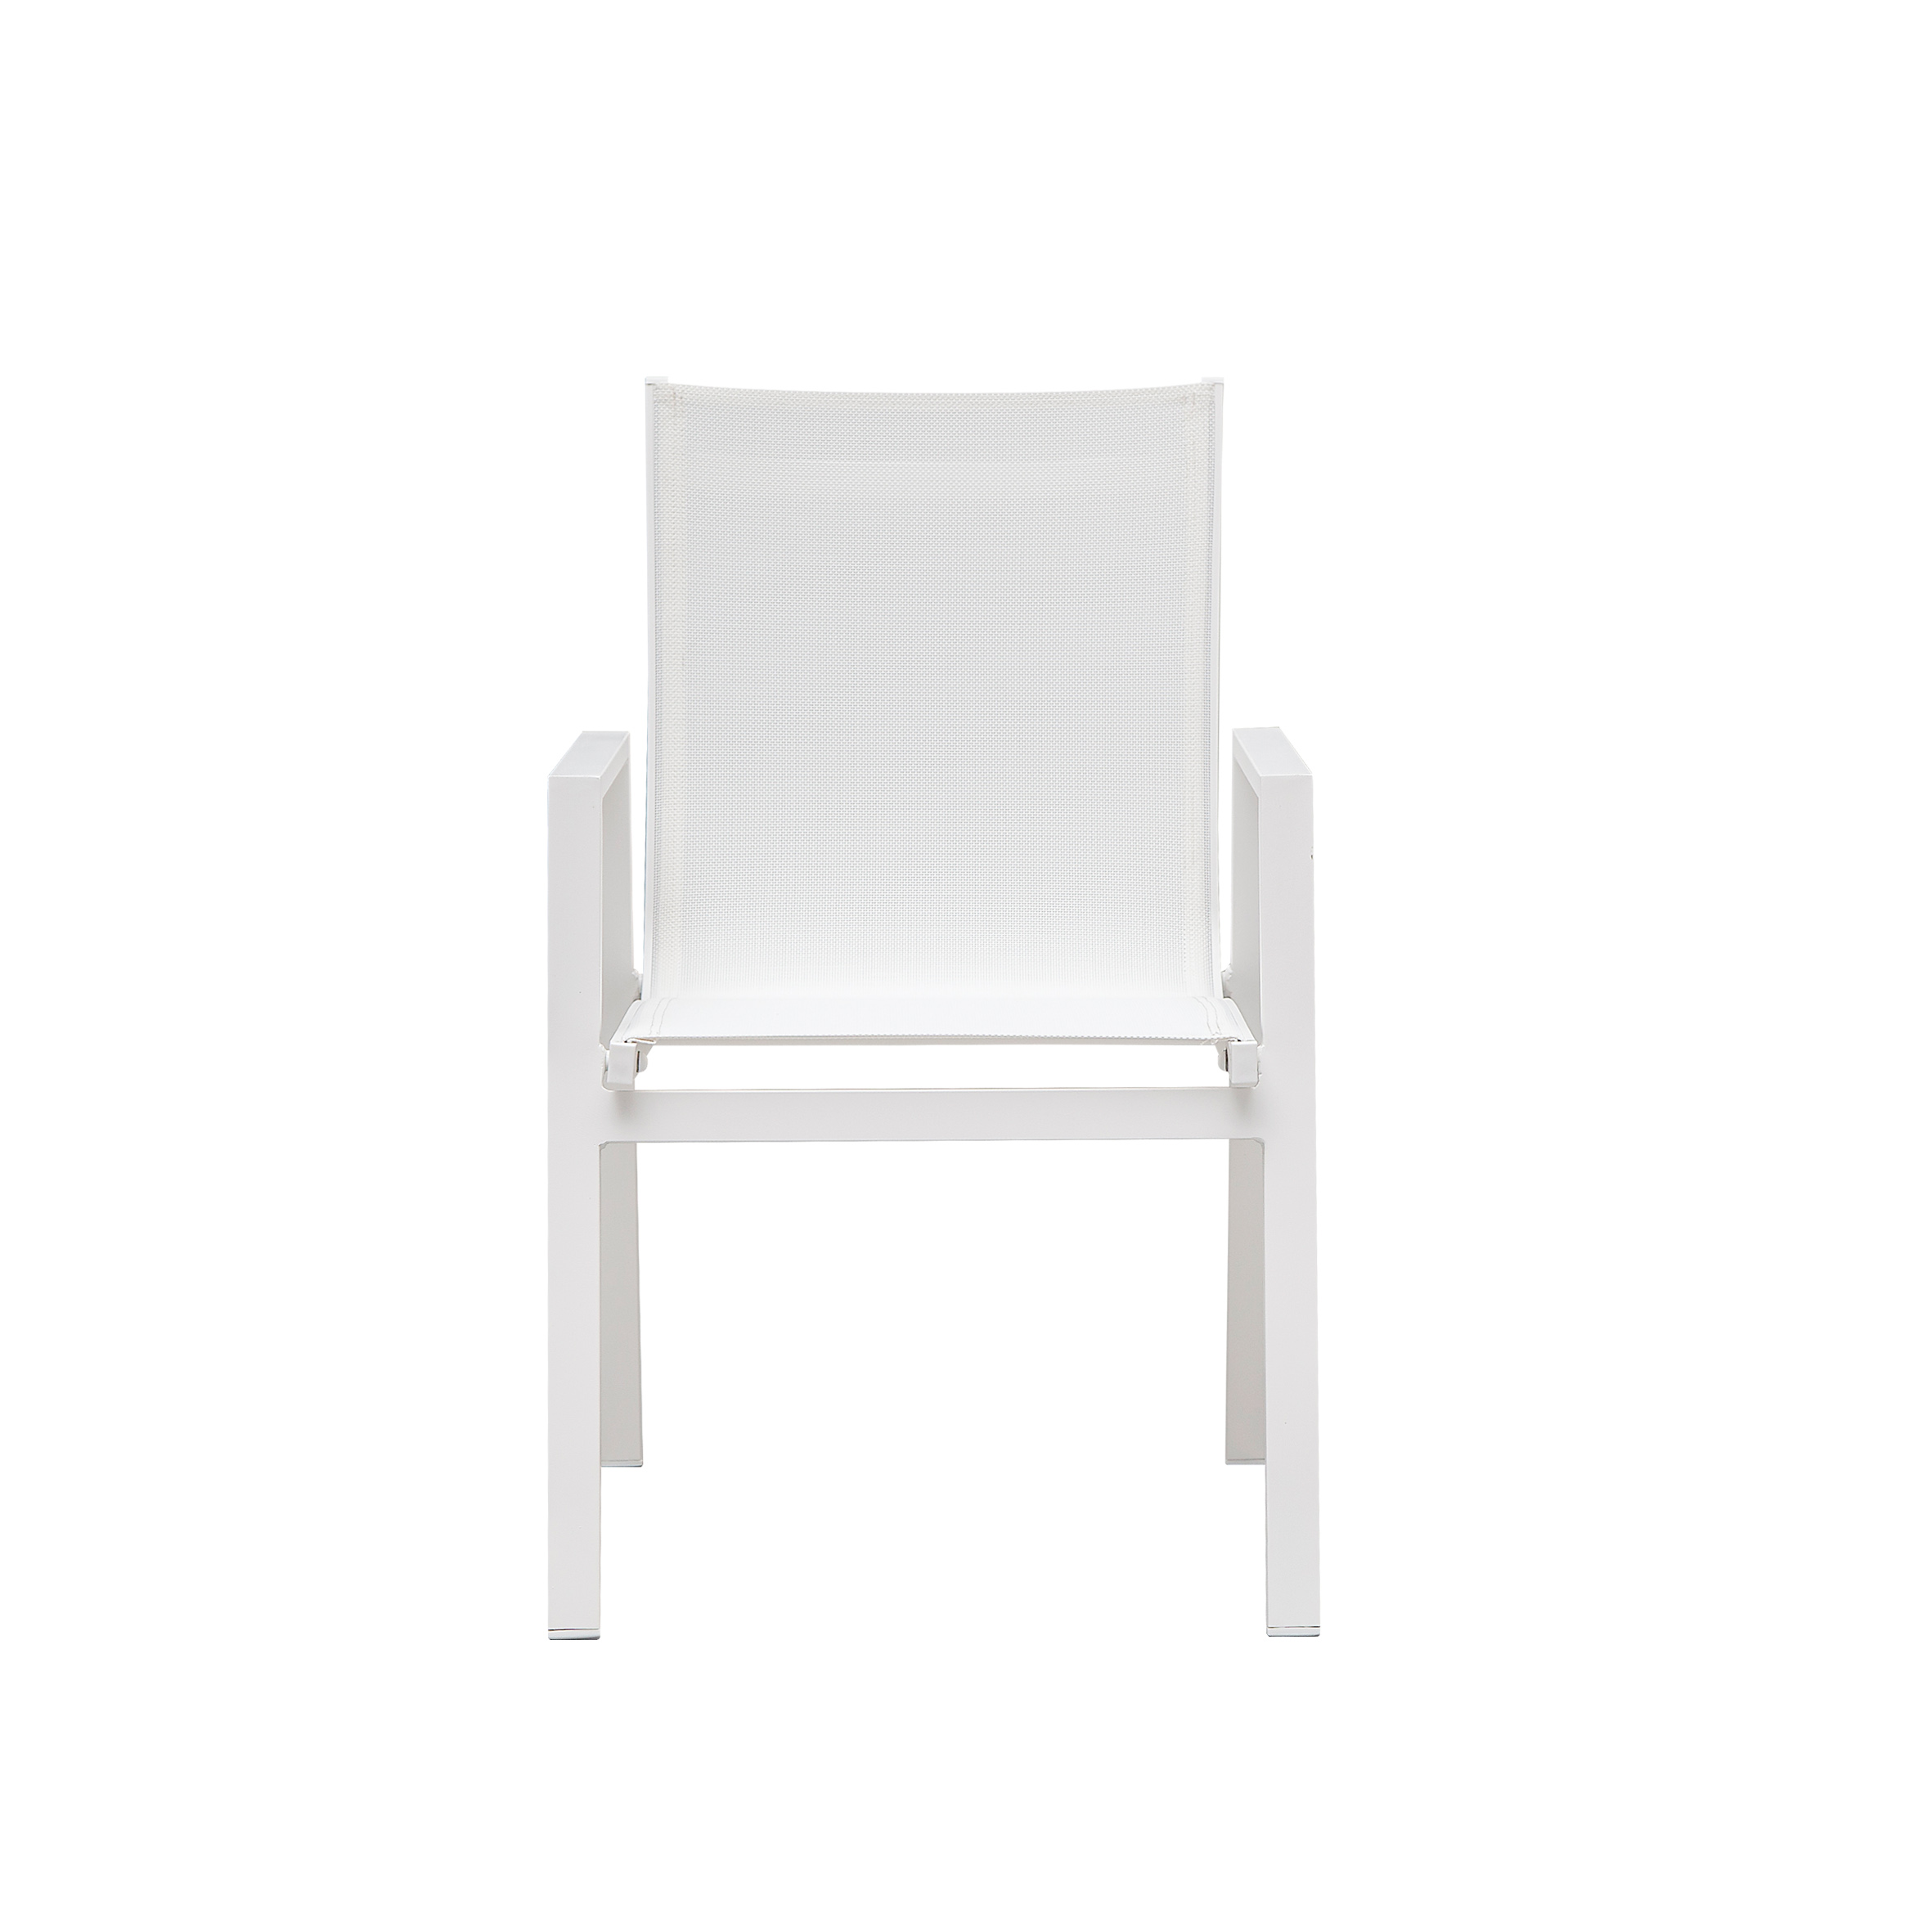 Snow white textile dining chair S3